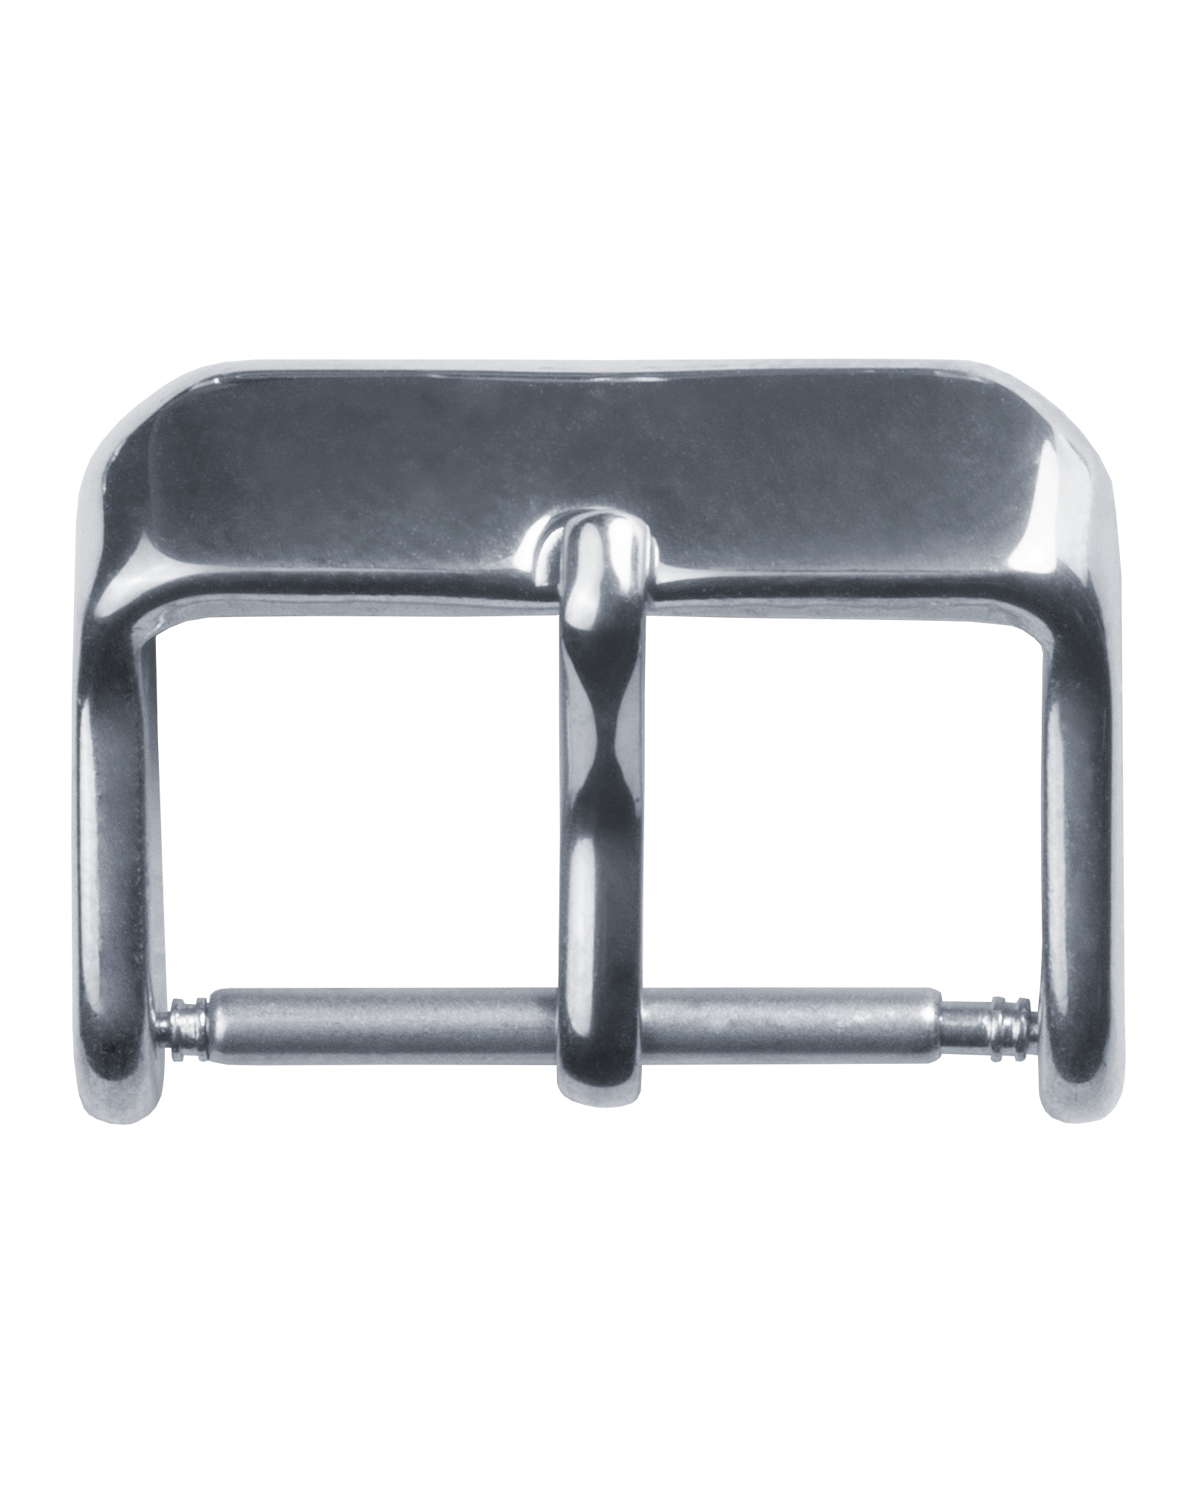 Chrono pin buckle, stainless steel